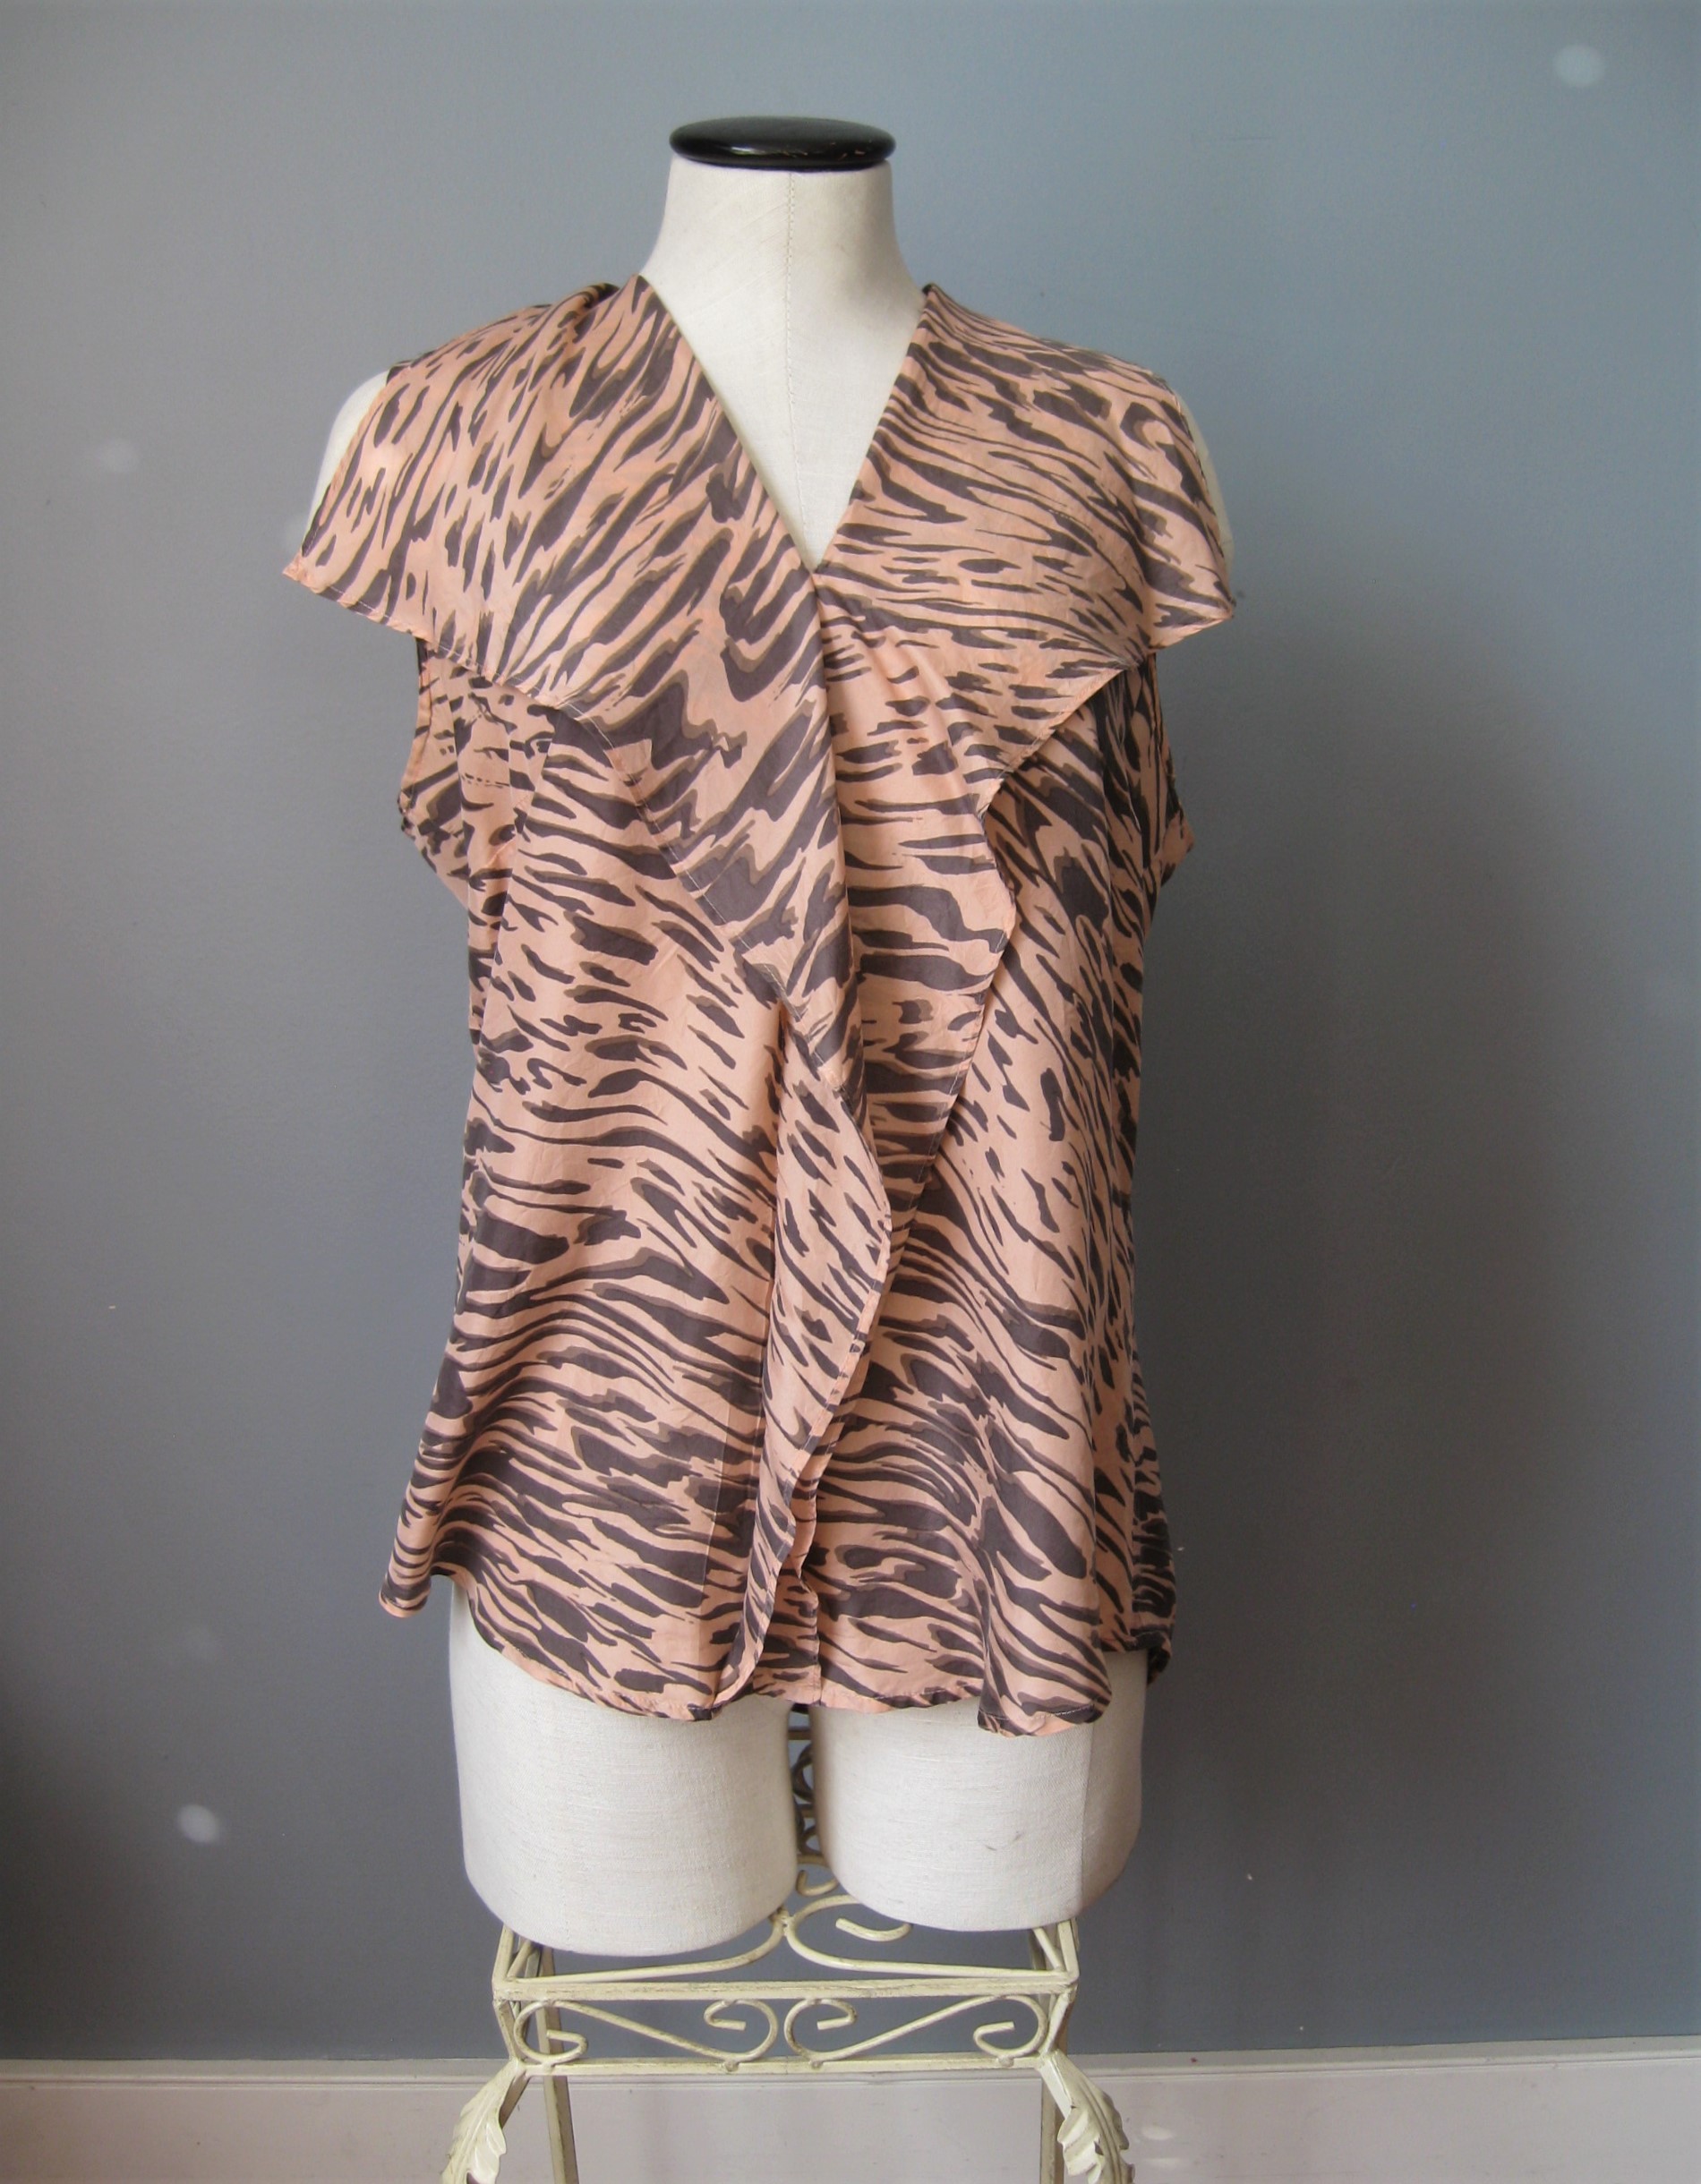 Pullover top from CAbi with a shawl collar and ruffle down the center front
Black tiger print on a peach background
100% silk

Size Medium
armpit to armpit: 21in
length: 26 3/4in

perfect condition
#1596